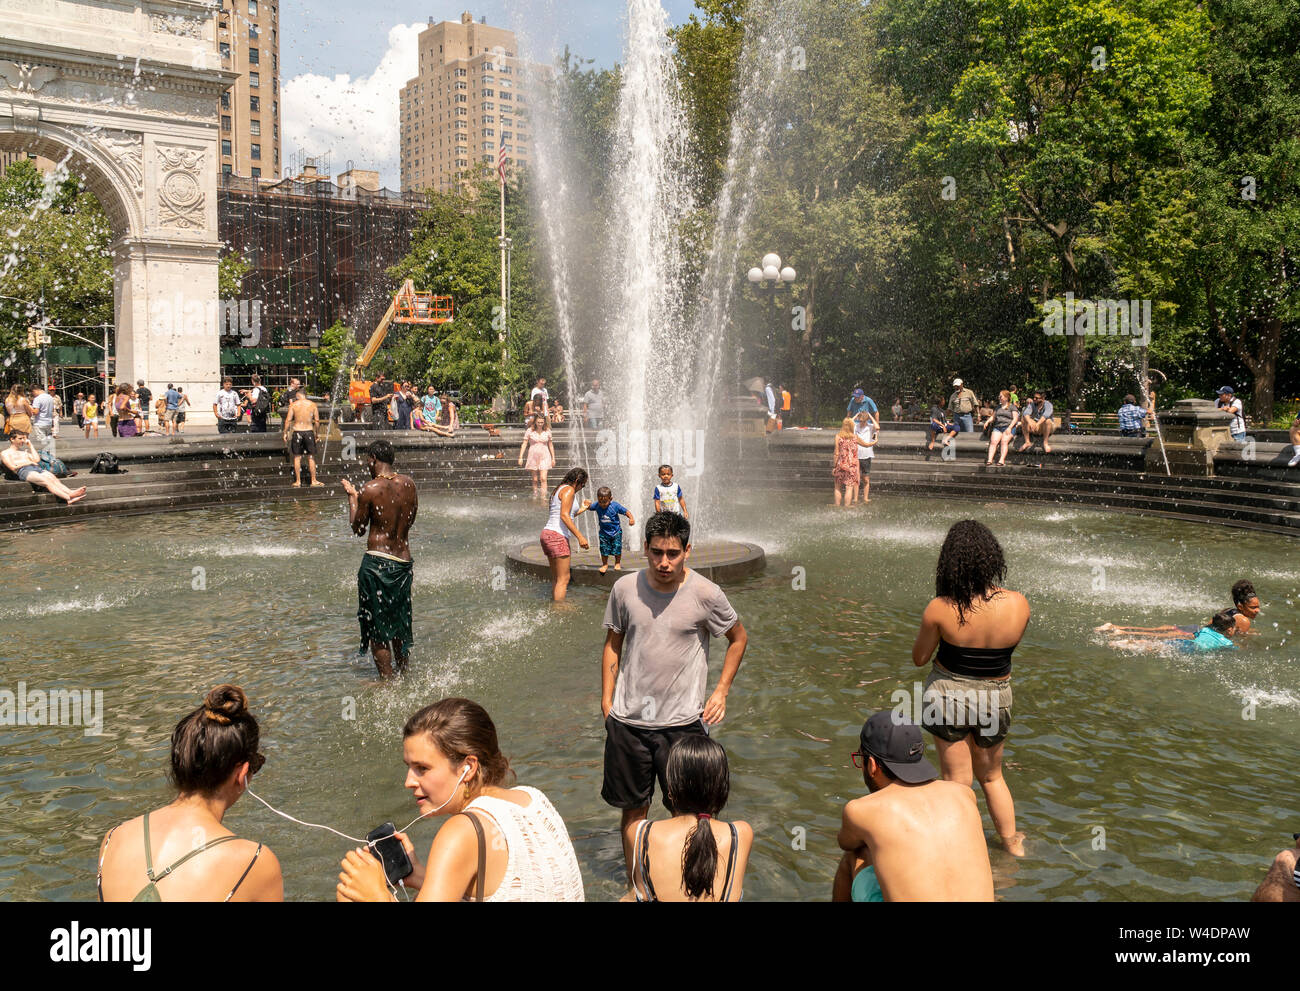 New Yorkers and visitors frolic by the fountain in Washington Square Park in Greenwich Village in New York on Saturday, July 20, 2019. An excessive heat warning is in effect in New York from noon Friday until 8PM Sunday as the oppressive combination of heat and humidity will make it feel like 105 degrees F. (© Richard B. Levine) Stock Photo